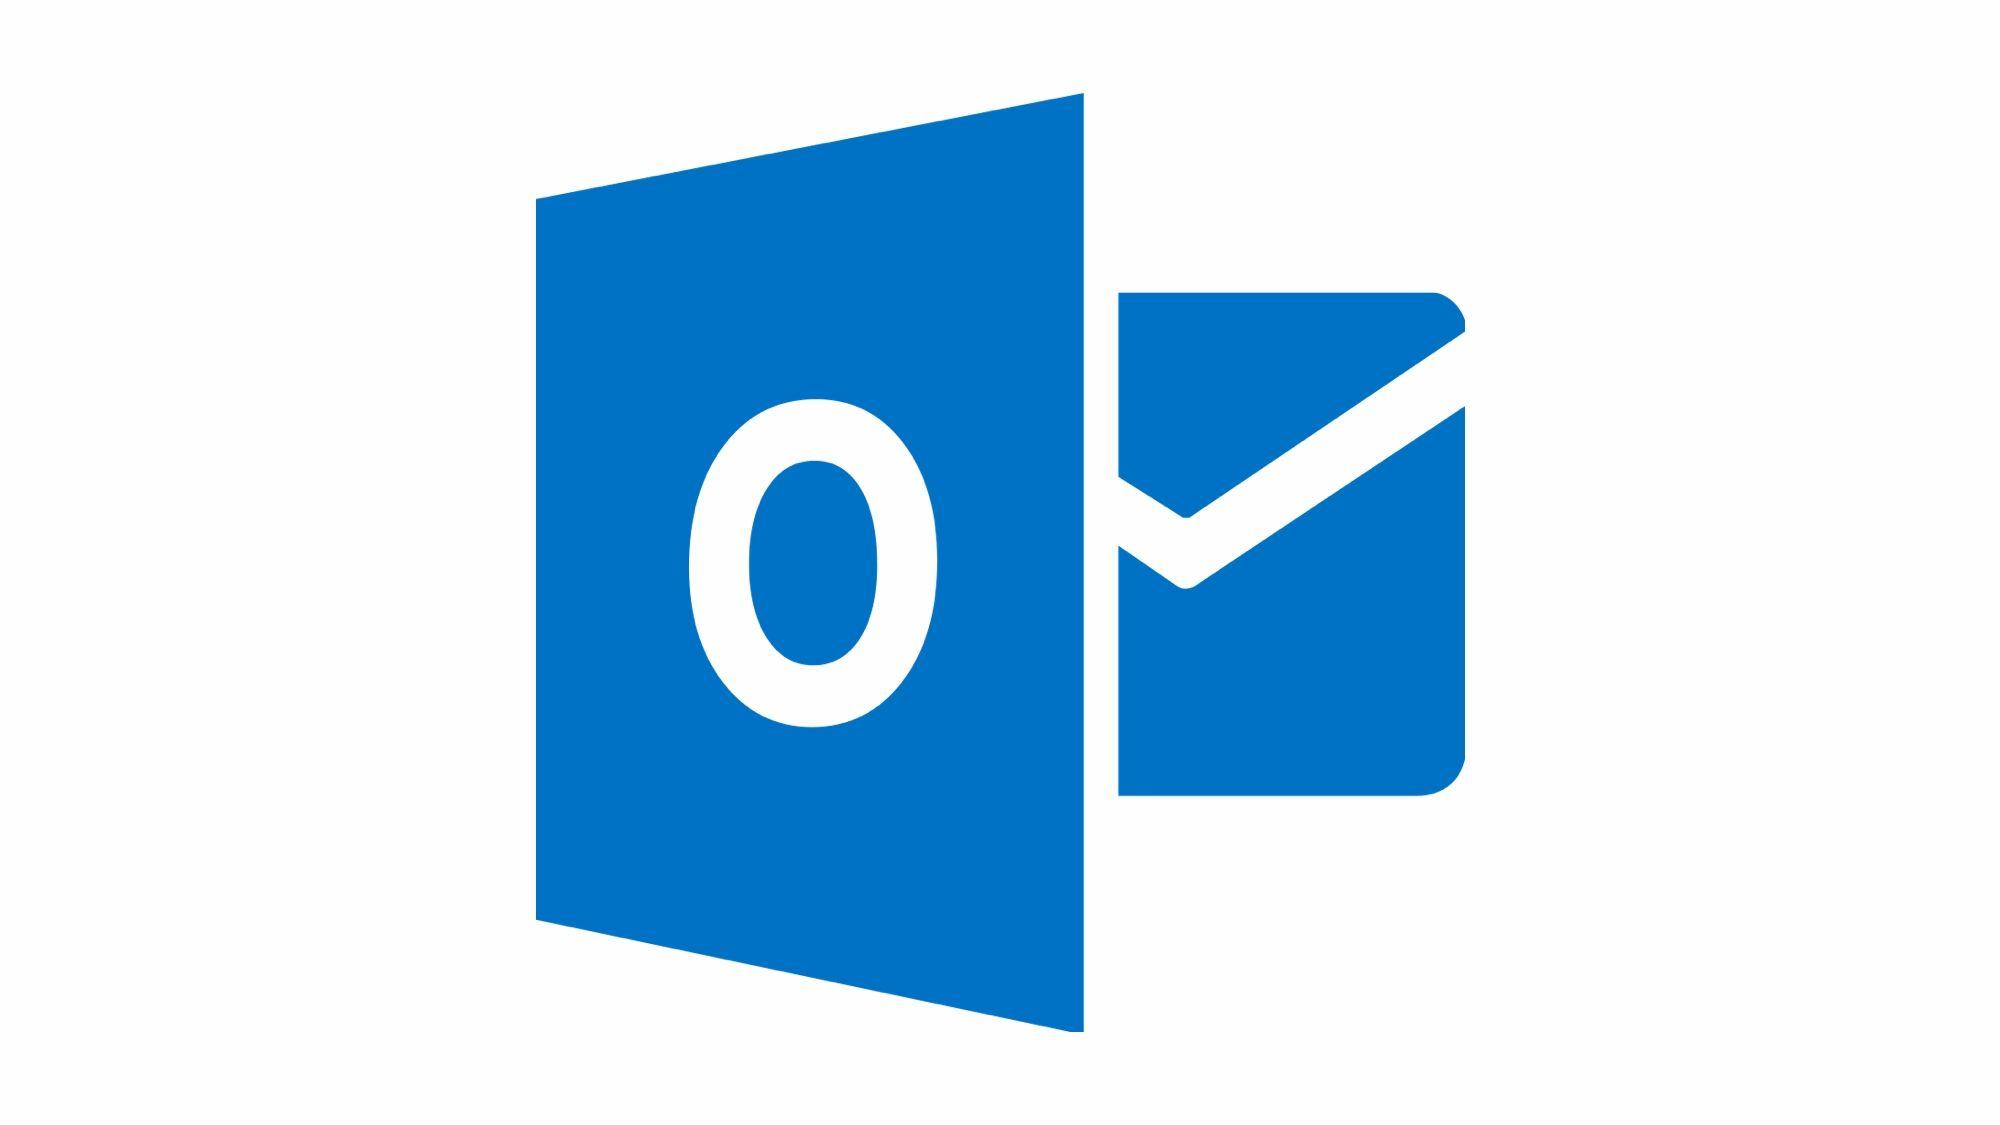 Outlook Transparent Logo - How to encrypt emails in Outlook | Alphr